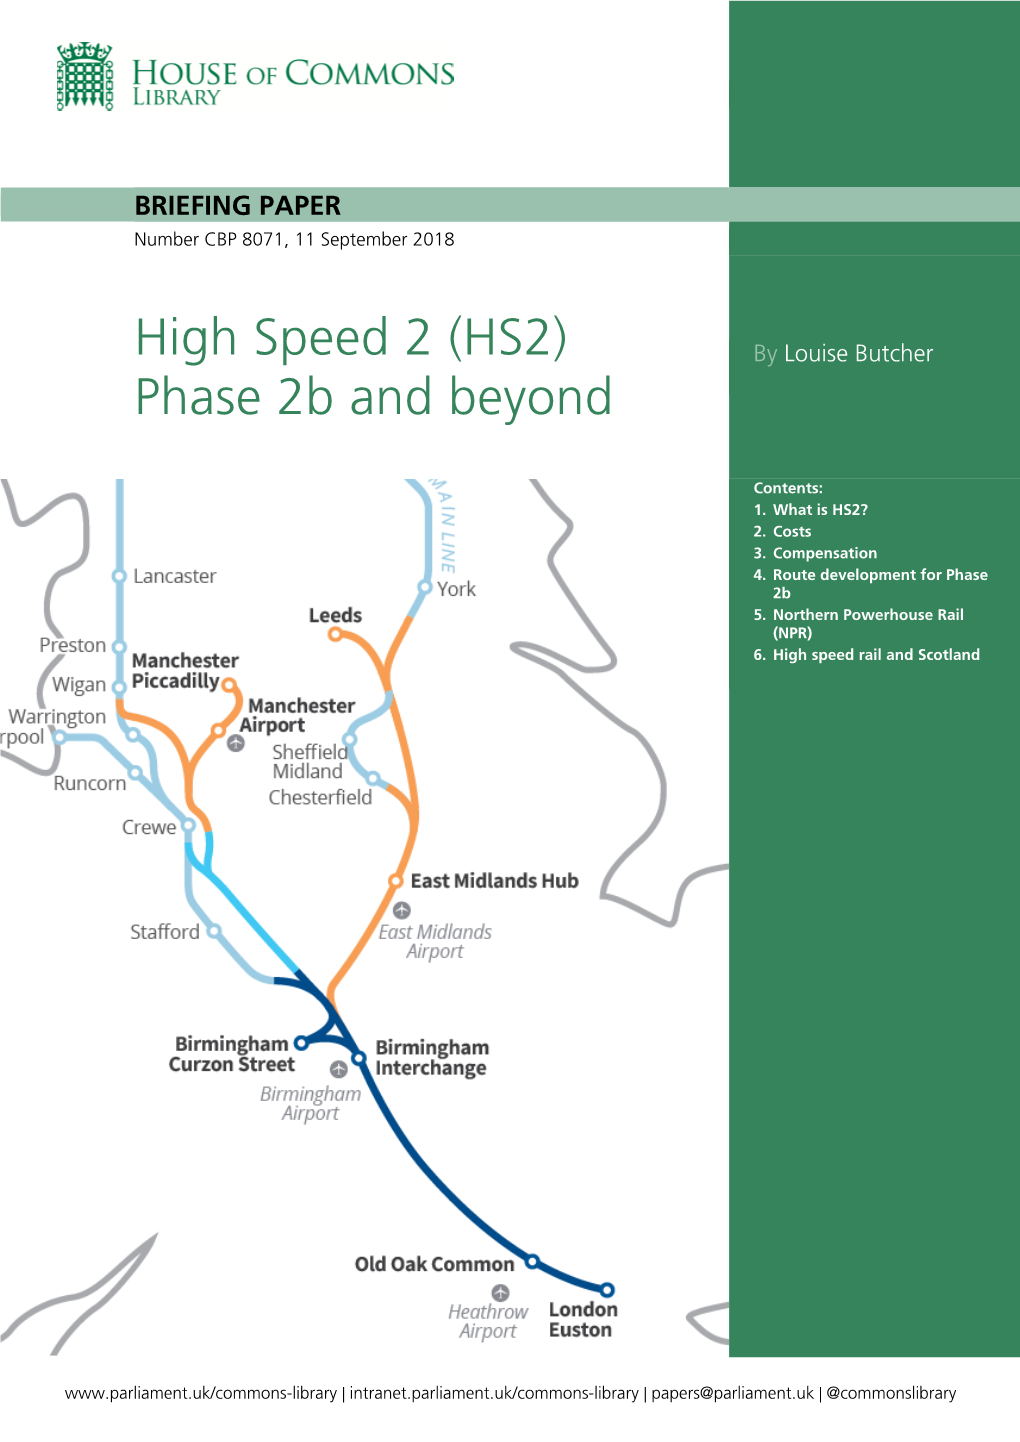 (HS2) Phase 2B and Beyond